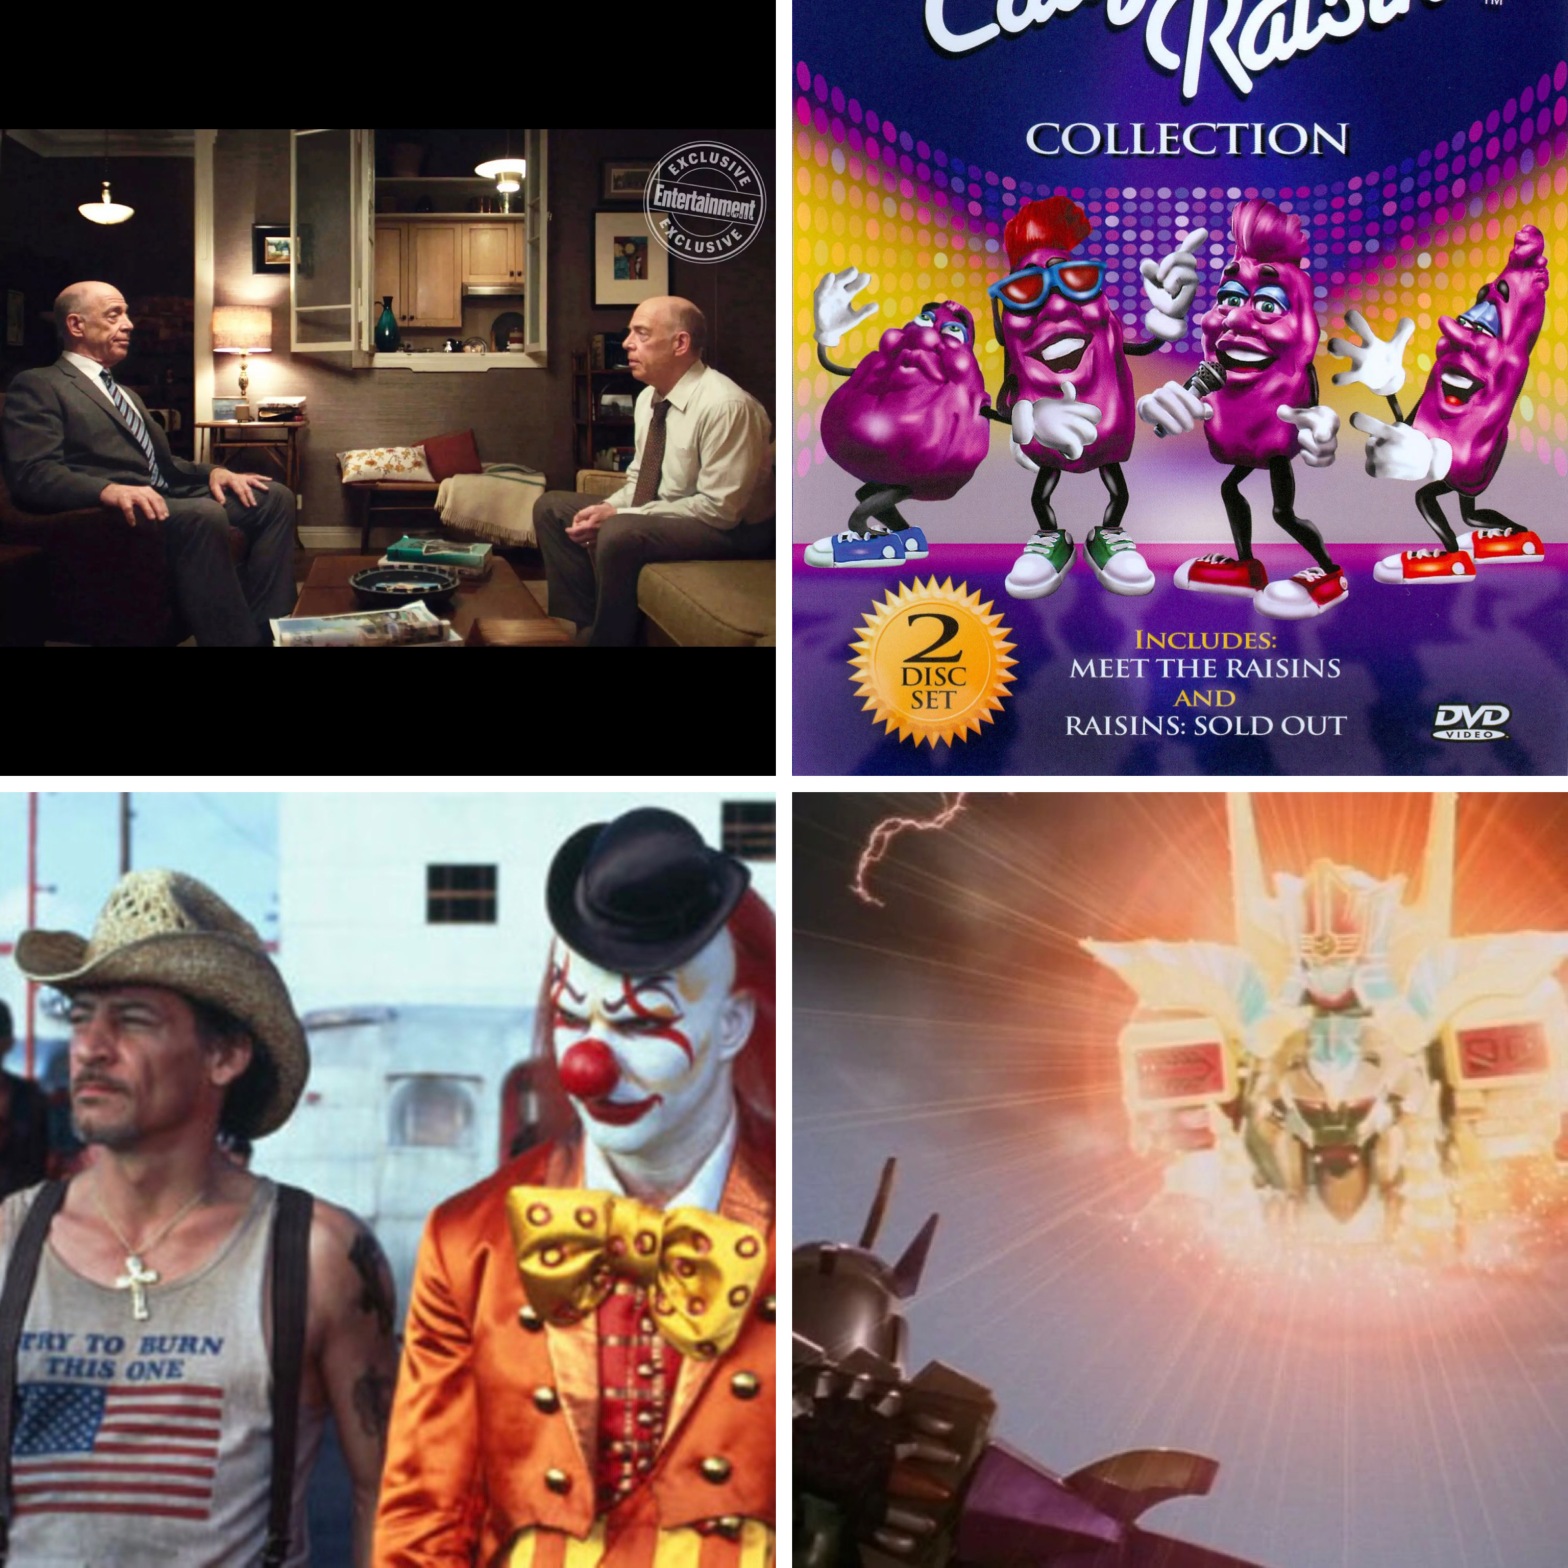 J.K. Simmons in Counterpart, a California Raisins DVD, Jim Varney in Wilder Napalm, and Animus from Power Rangers.